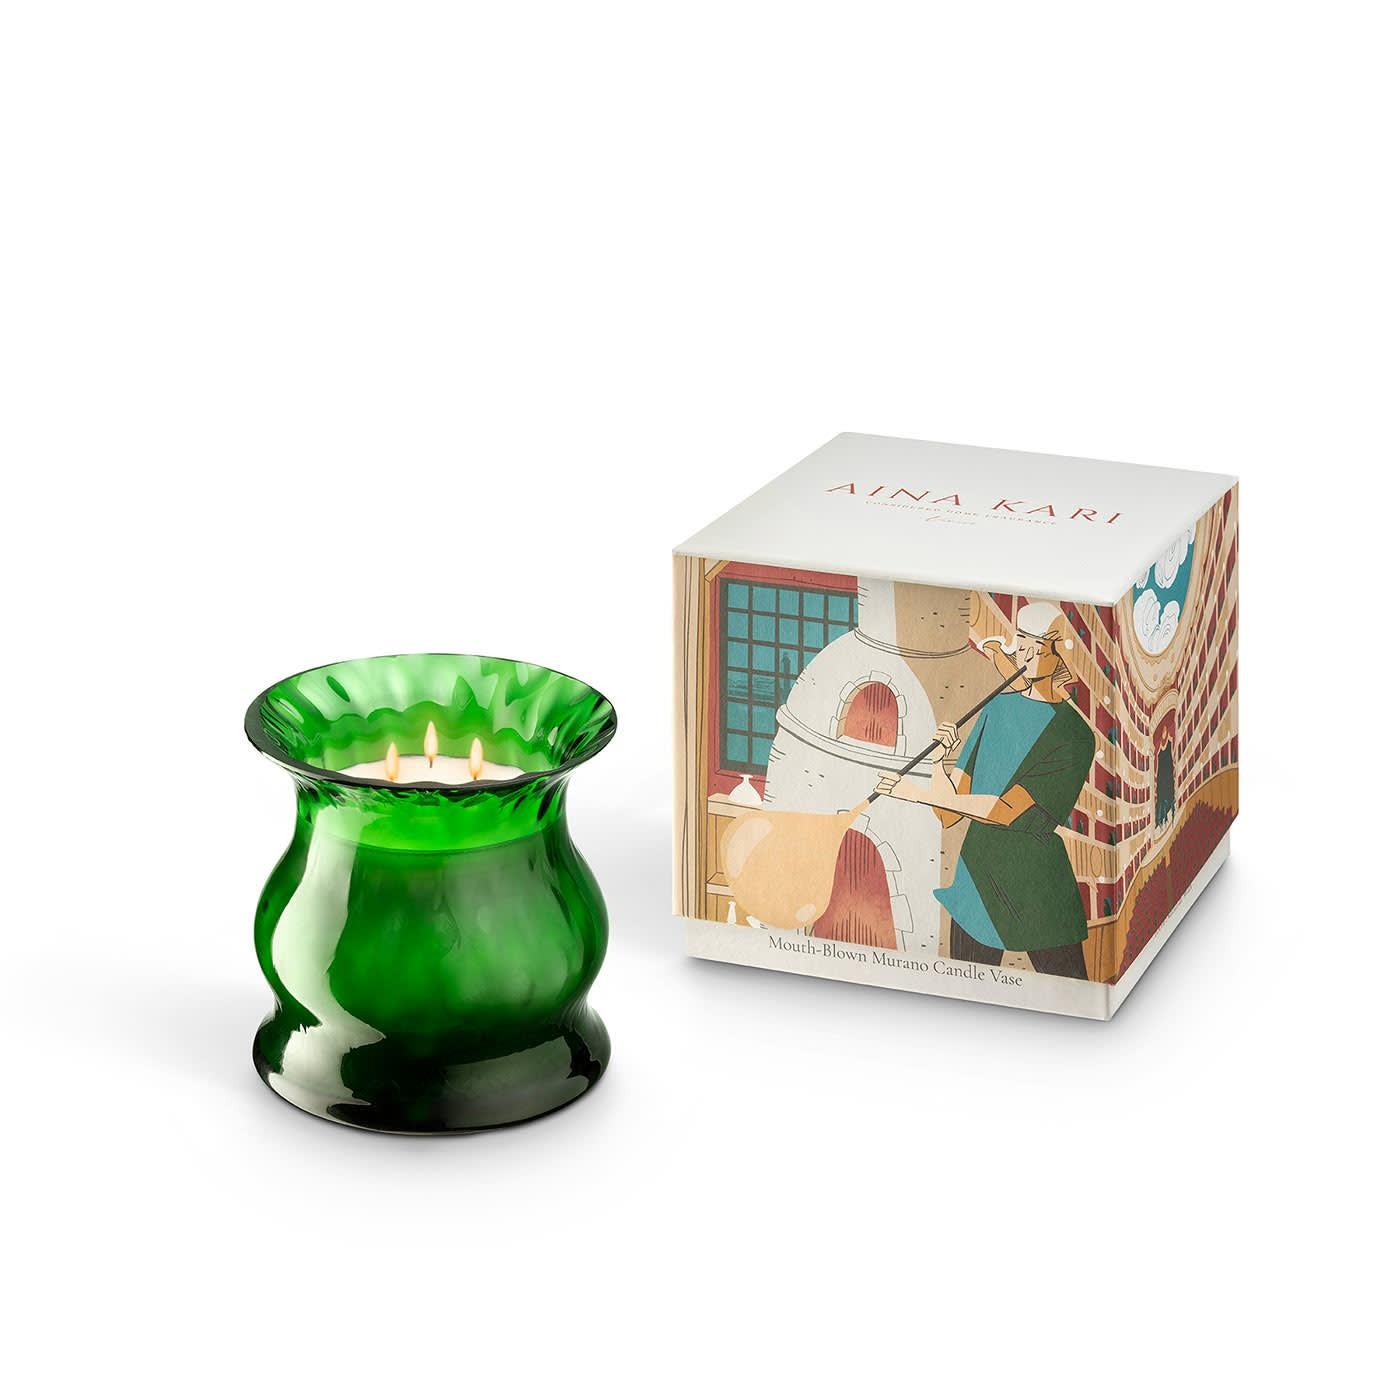 A tale of beauty, rarity, and mania-Murano glass blooming tulip using old techniques blends into a surprising modern shape. Beautiful Murano glass large candle with stunning light macramé, enhancing this new brilliant lush green. Mysterious saffron